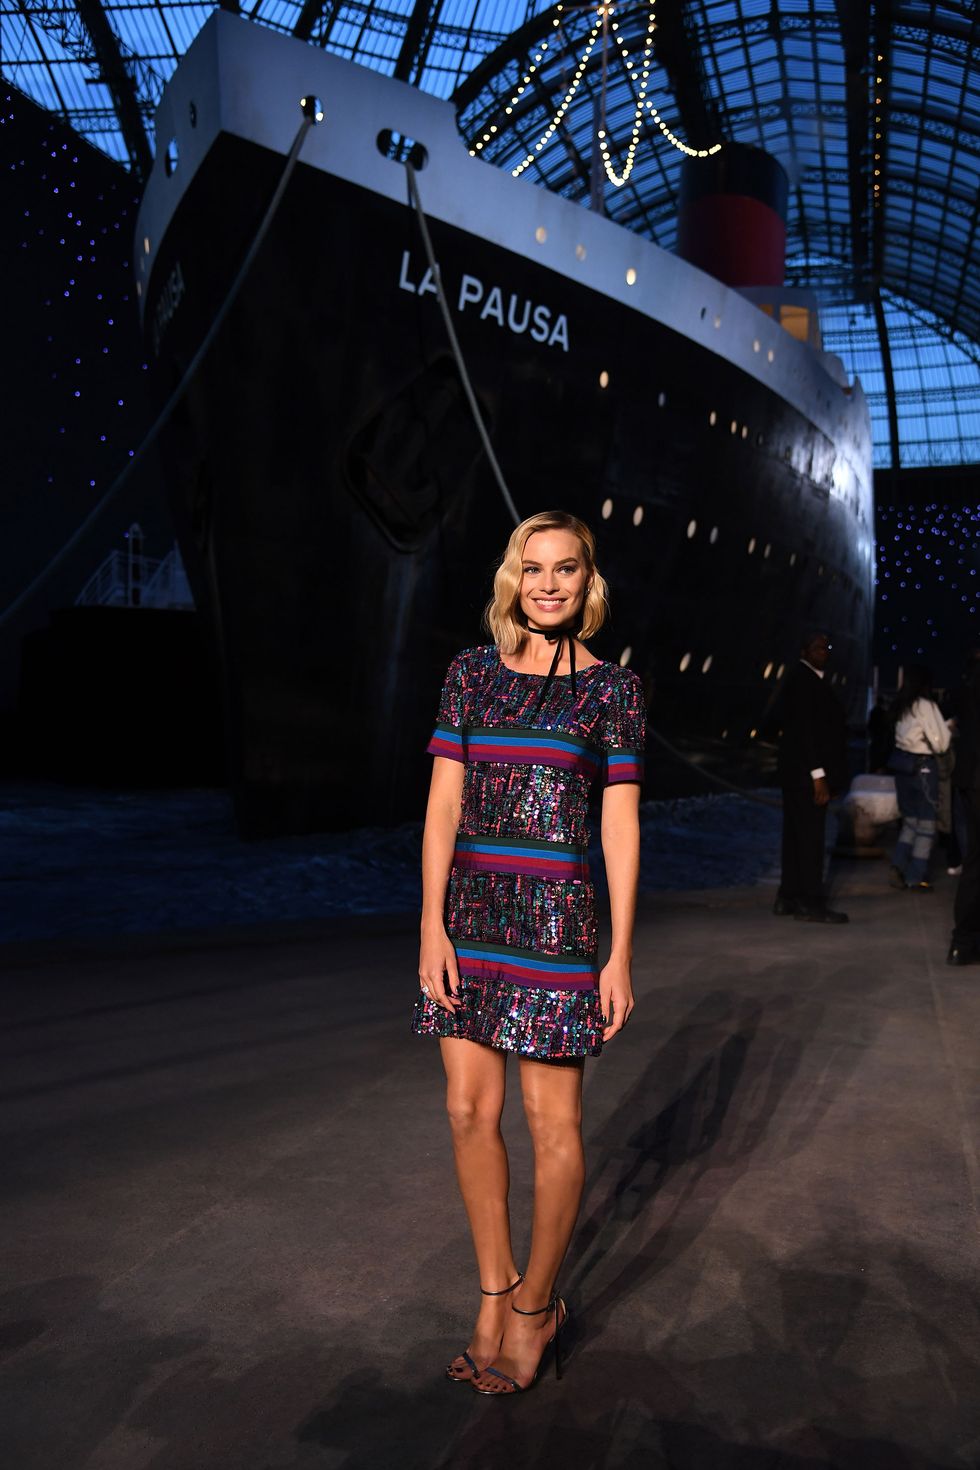 Inside Chanel's nautical-themed Cruise 2018 show